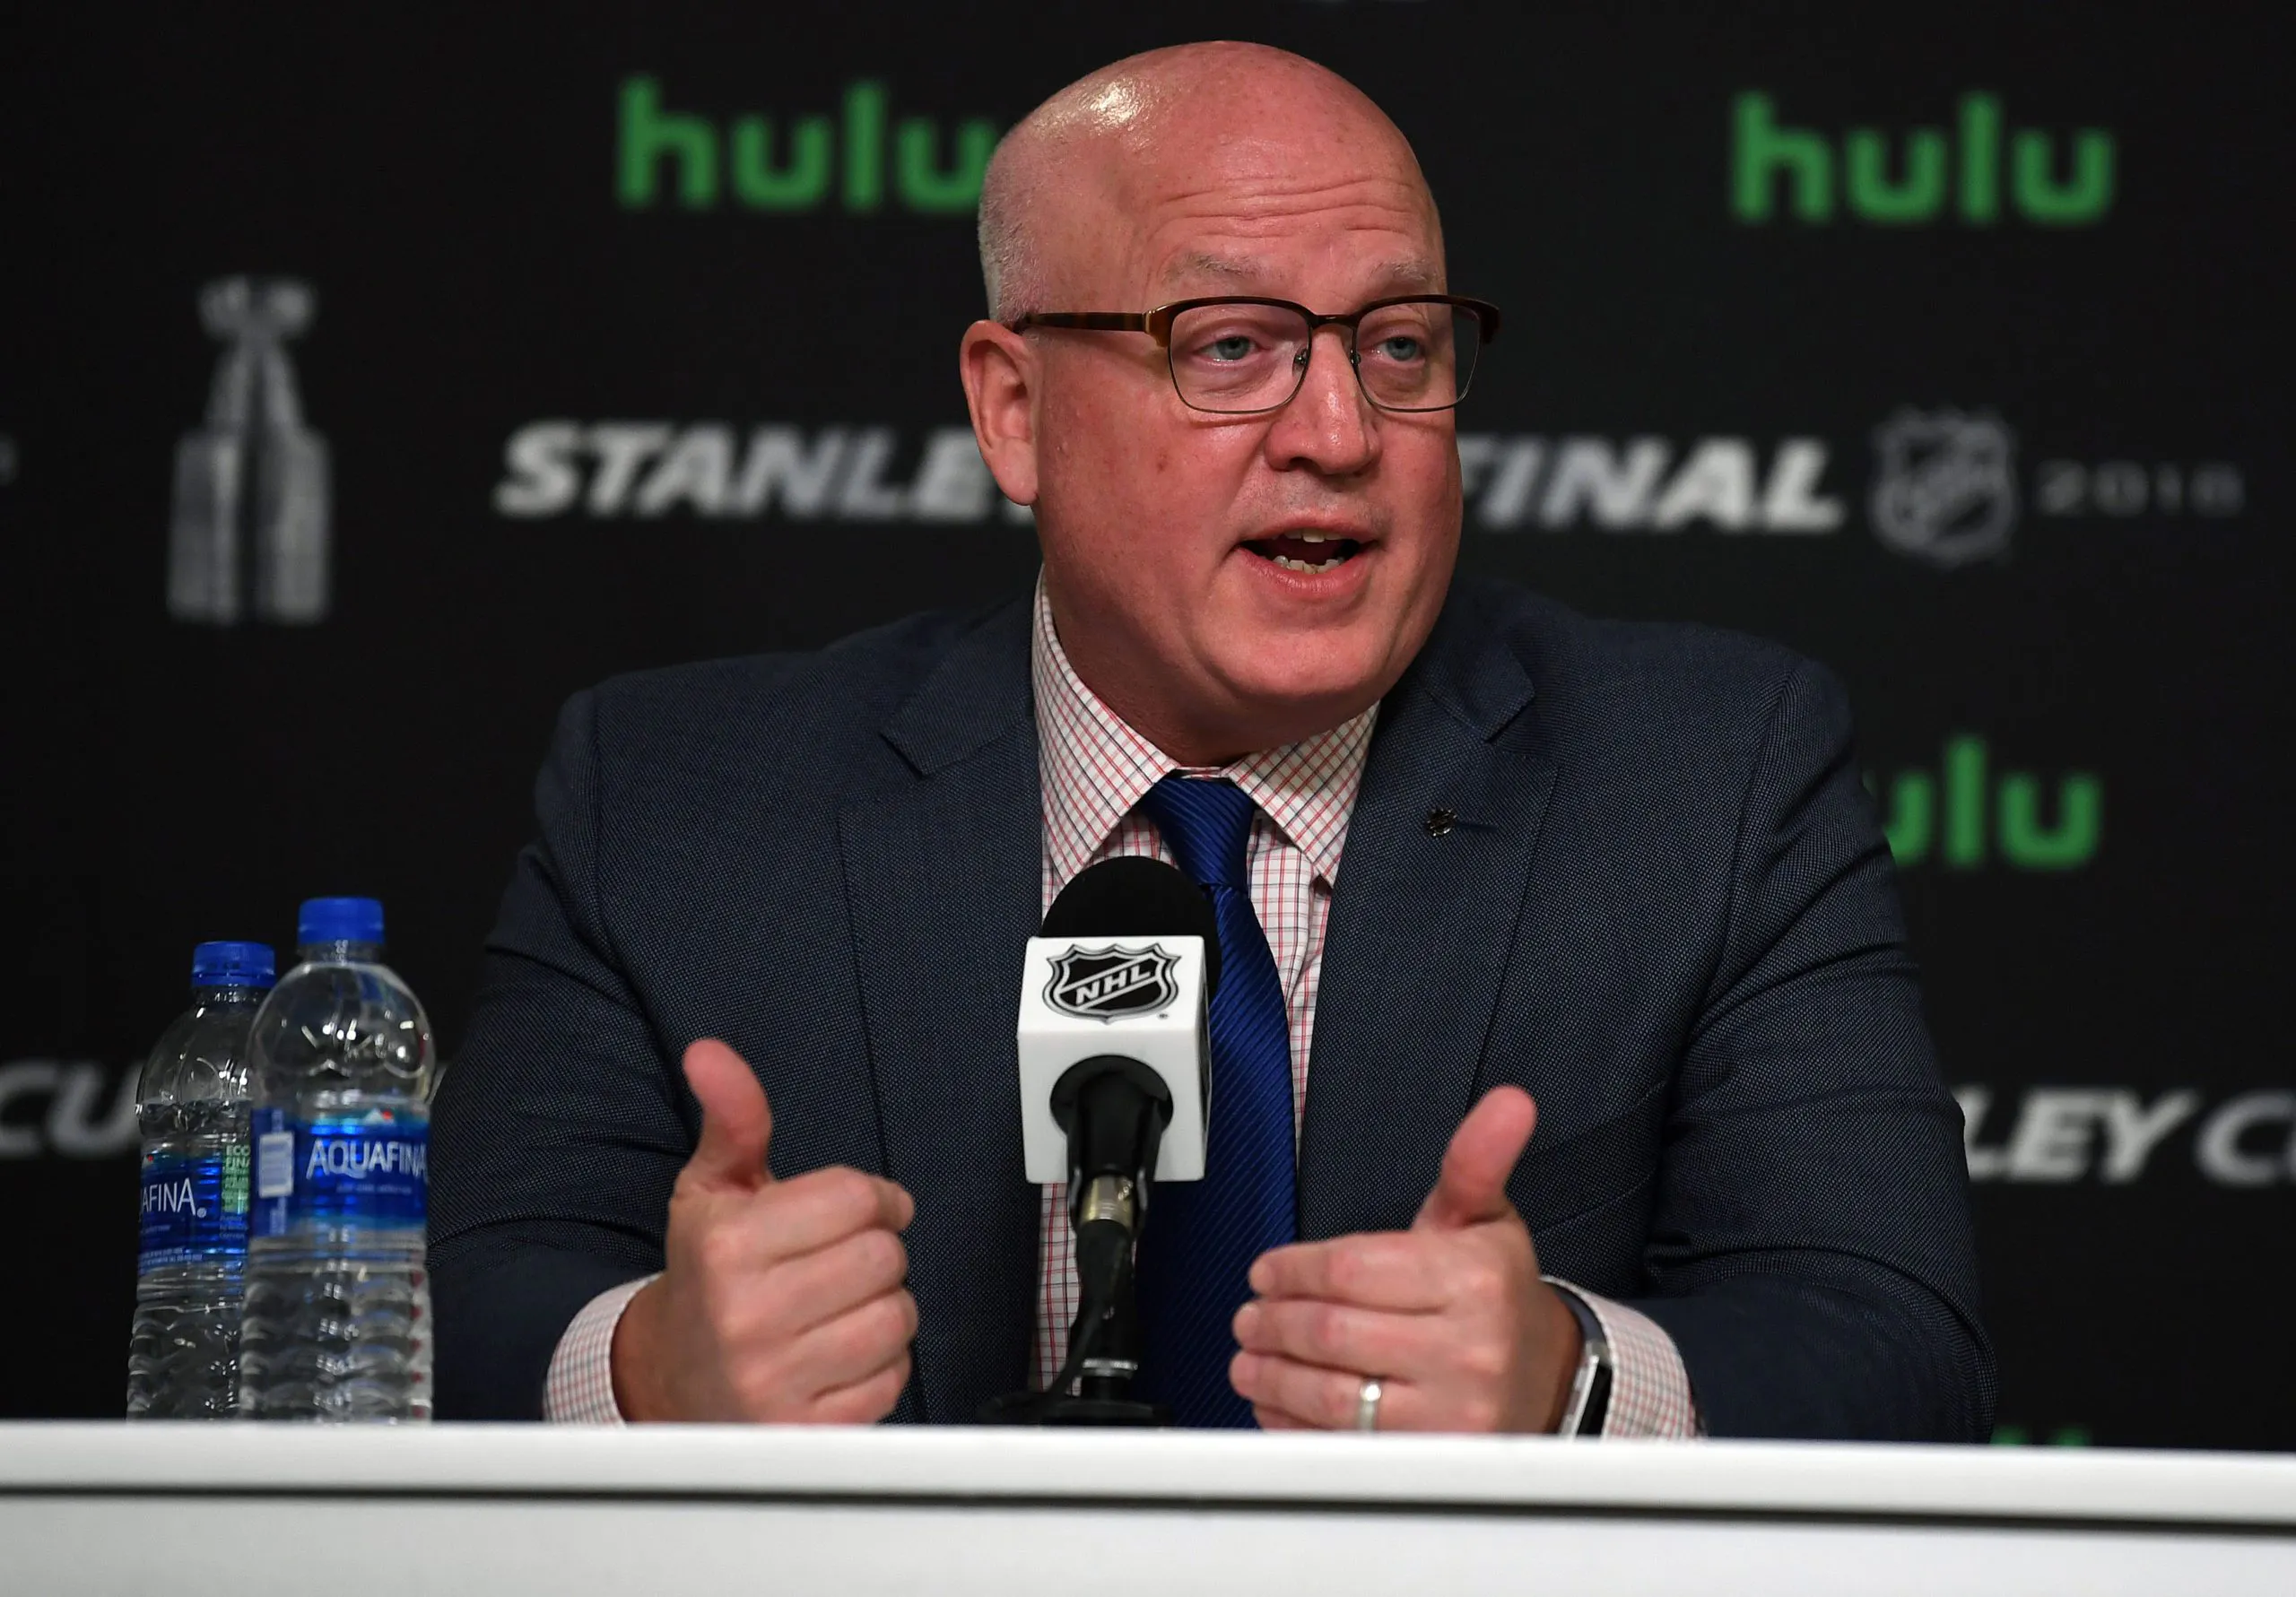 SERAVALLI: NHL projects 98% of players will be fully vaccinated this season